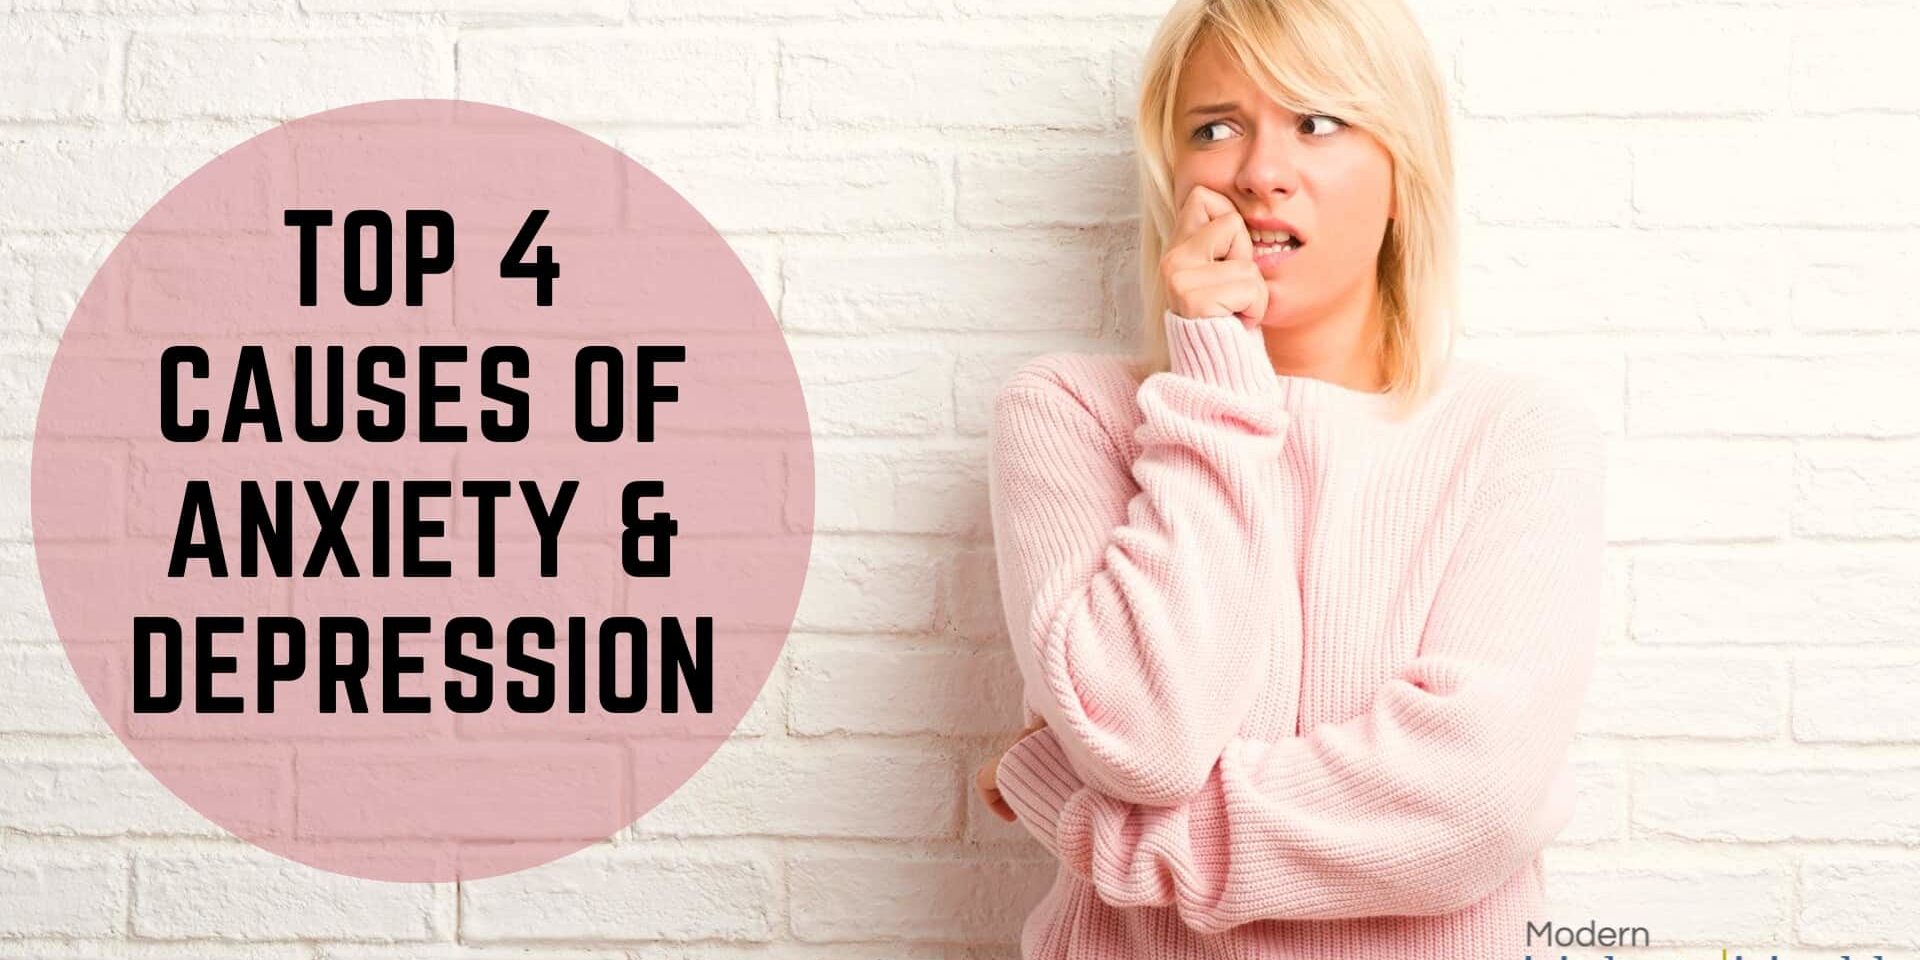 Top 4 Causes of Anxiety & Depression